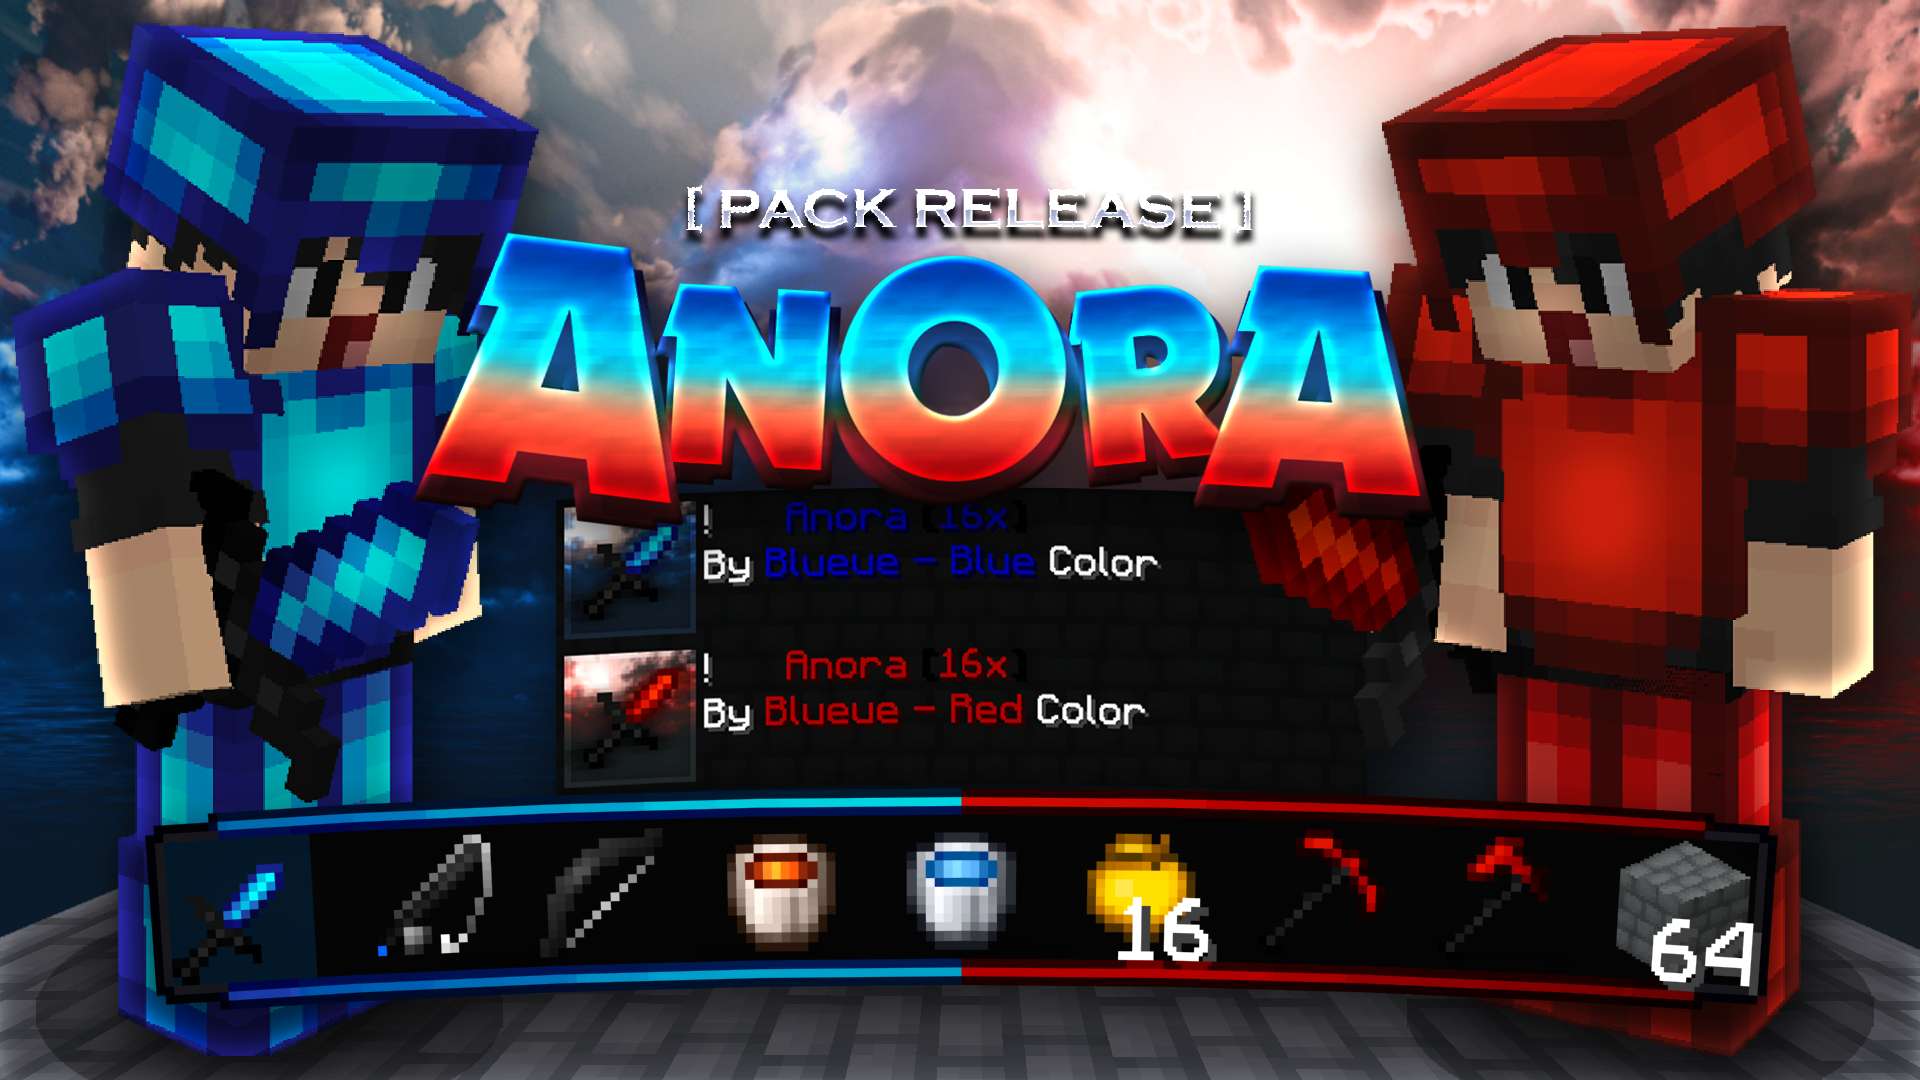 Anora // Blue Recolor 16 by Blueue on PvPRP